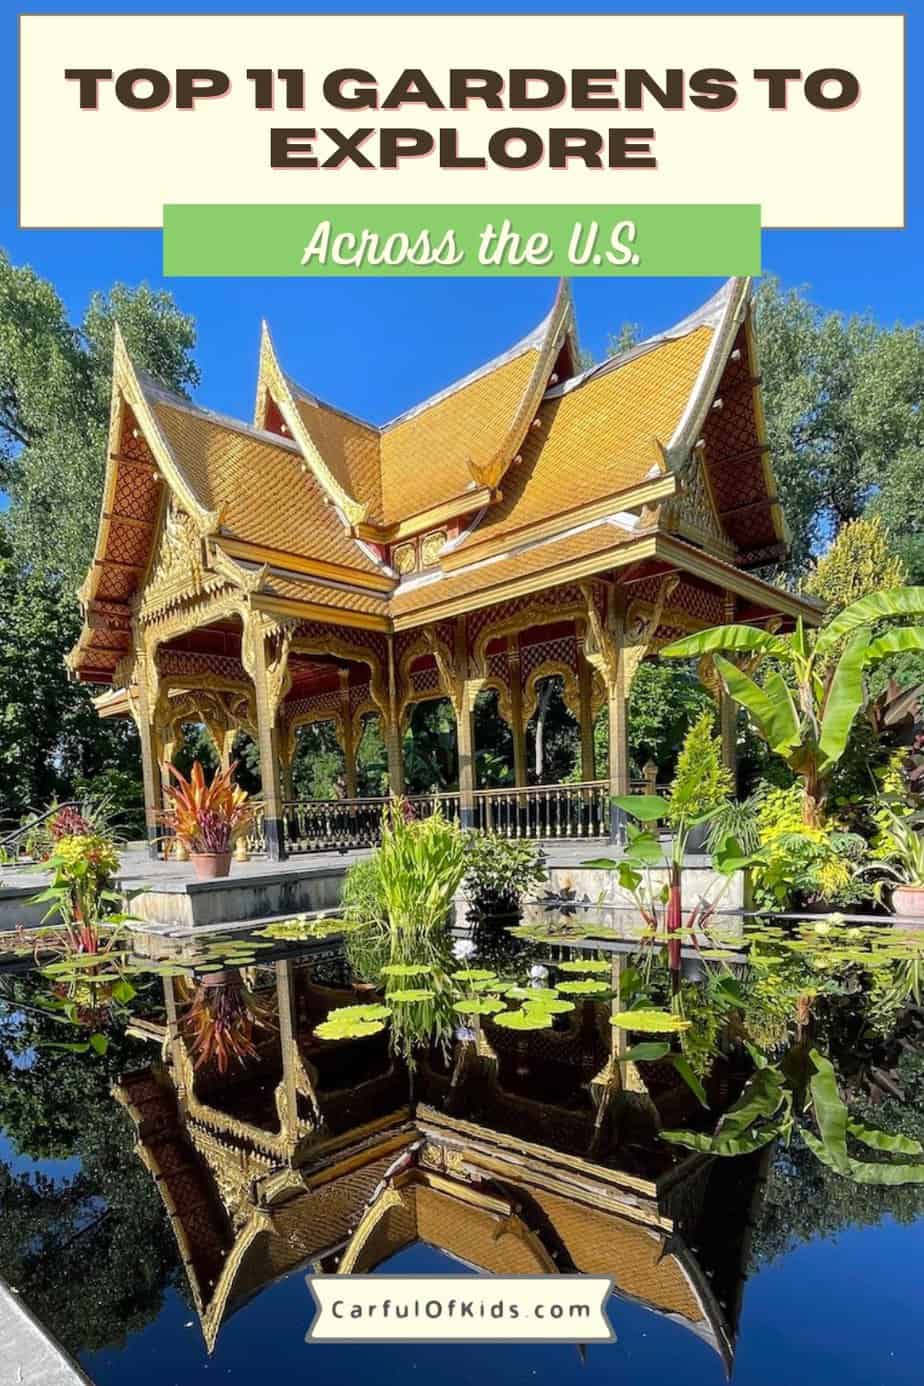 From New York to Los Angeles, here are the top gardens in the U.S. Each offer a colorful display of plants and some offers Asian Temples, sculptures, conservatories of another era along with children's gardens along with rose gardens and more. Top Gardens across the U.S. | Best Gardens to see #Gardens